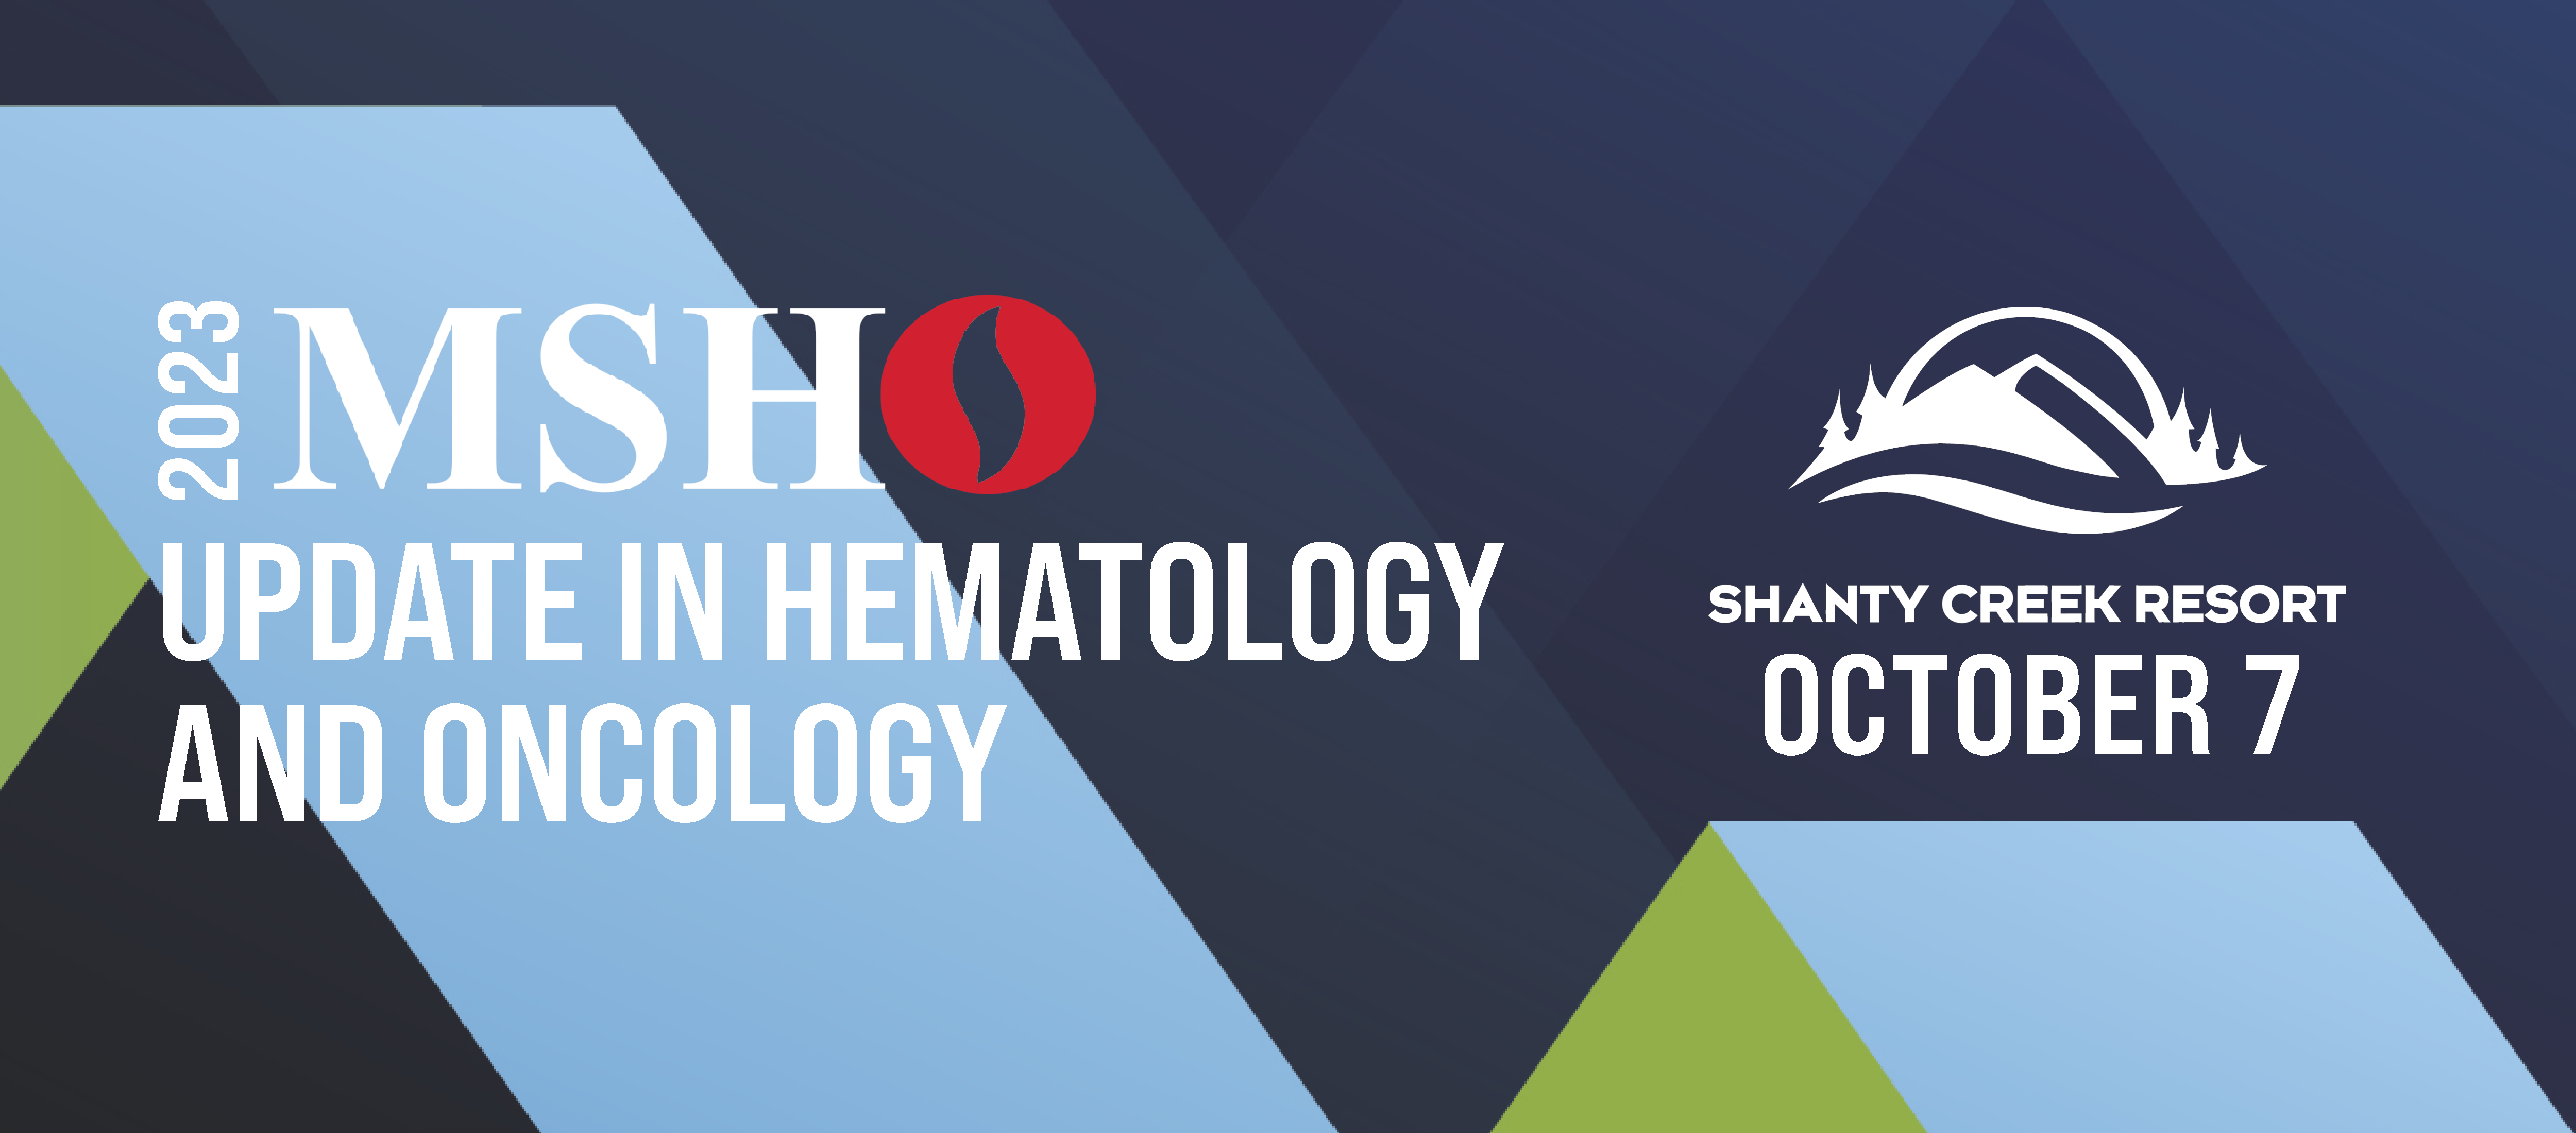 Update in Hematology and Oncology